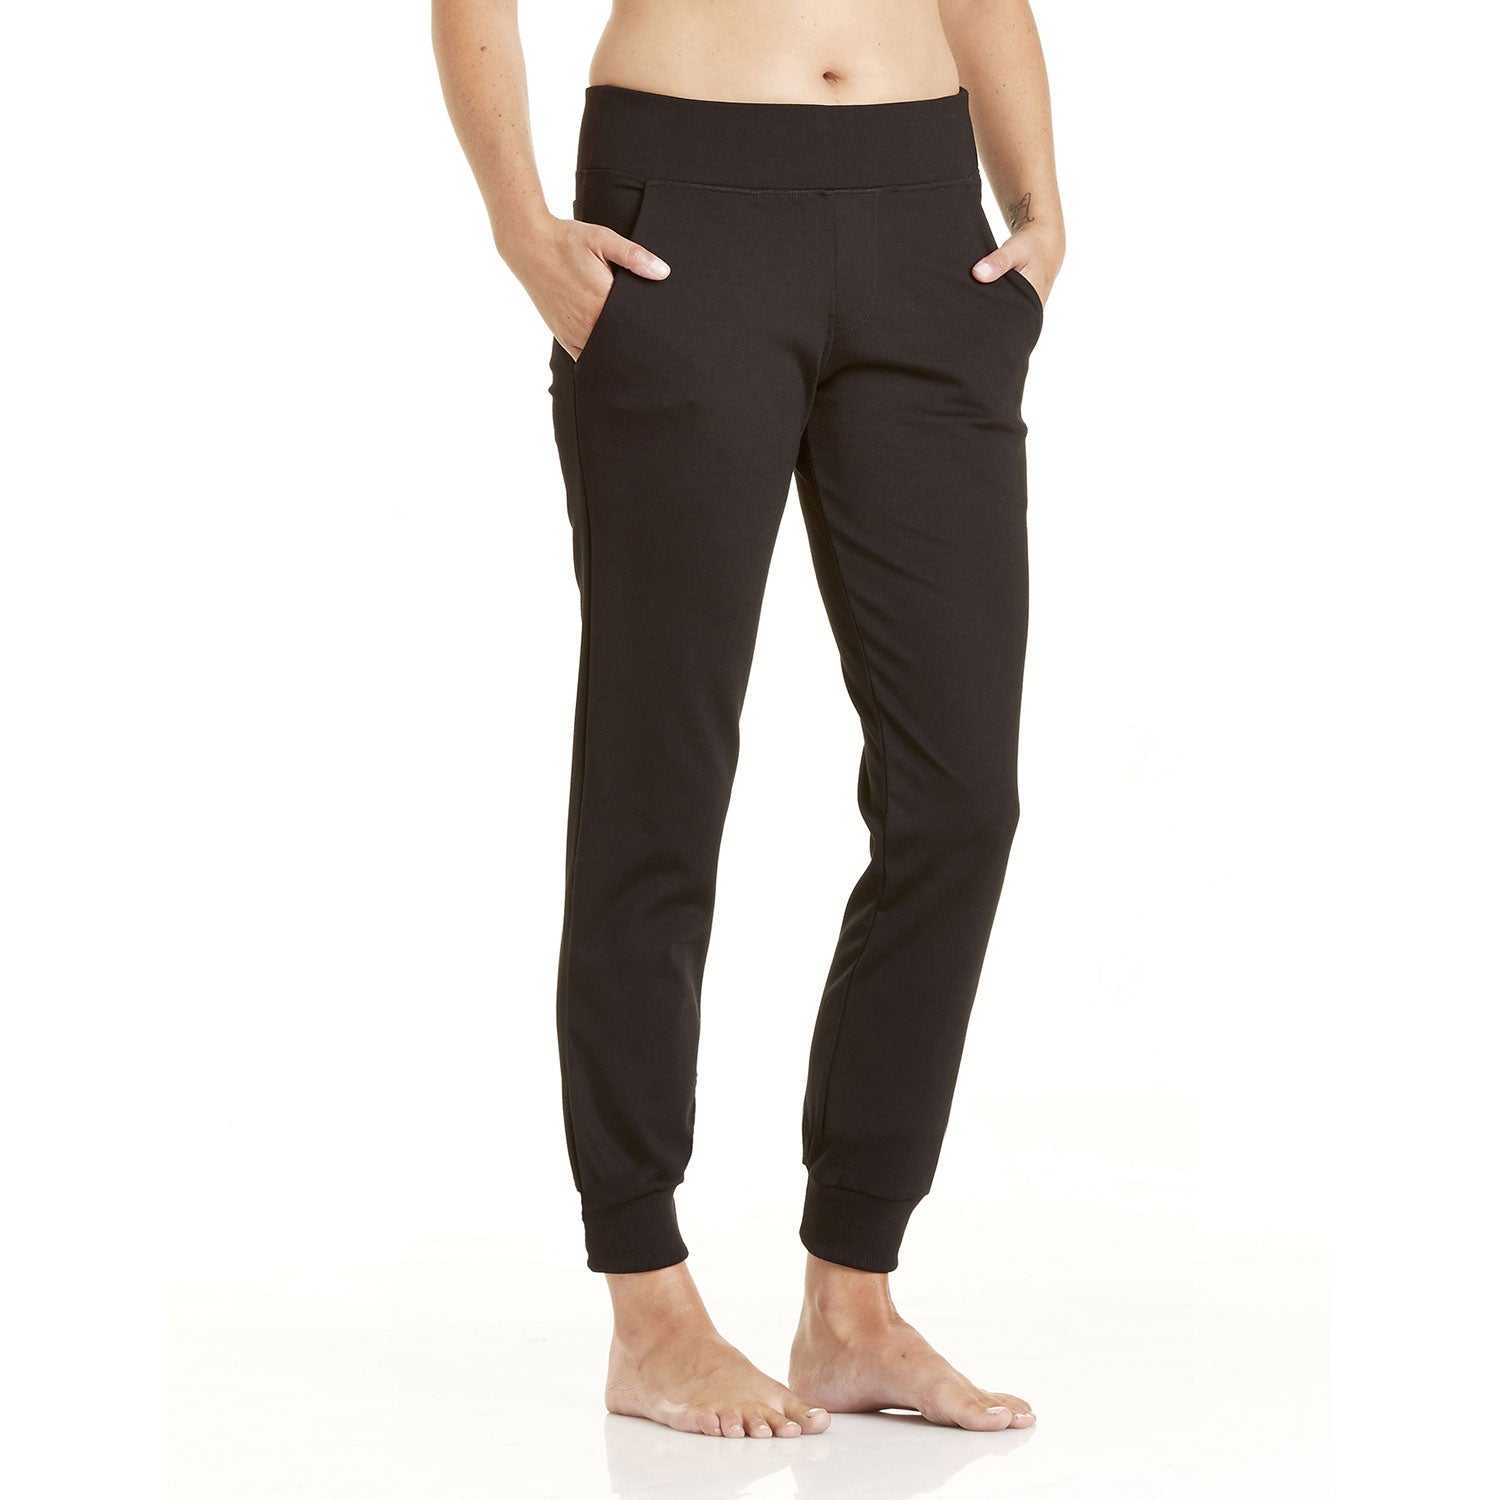 FIG Clothing Women's OTH Pants | Altitude Sports